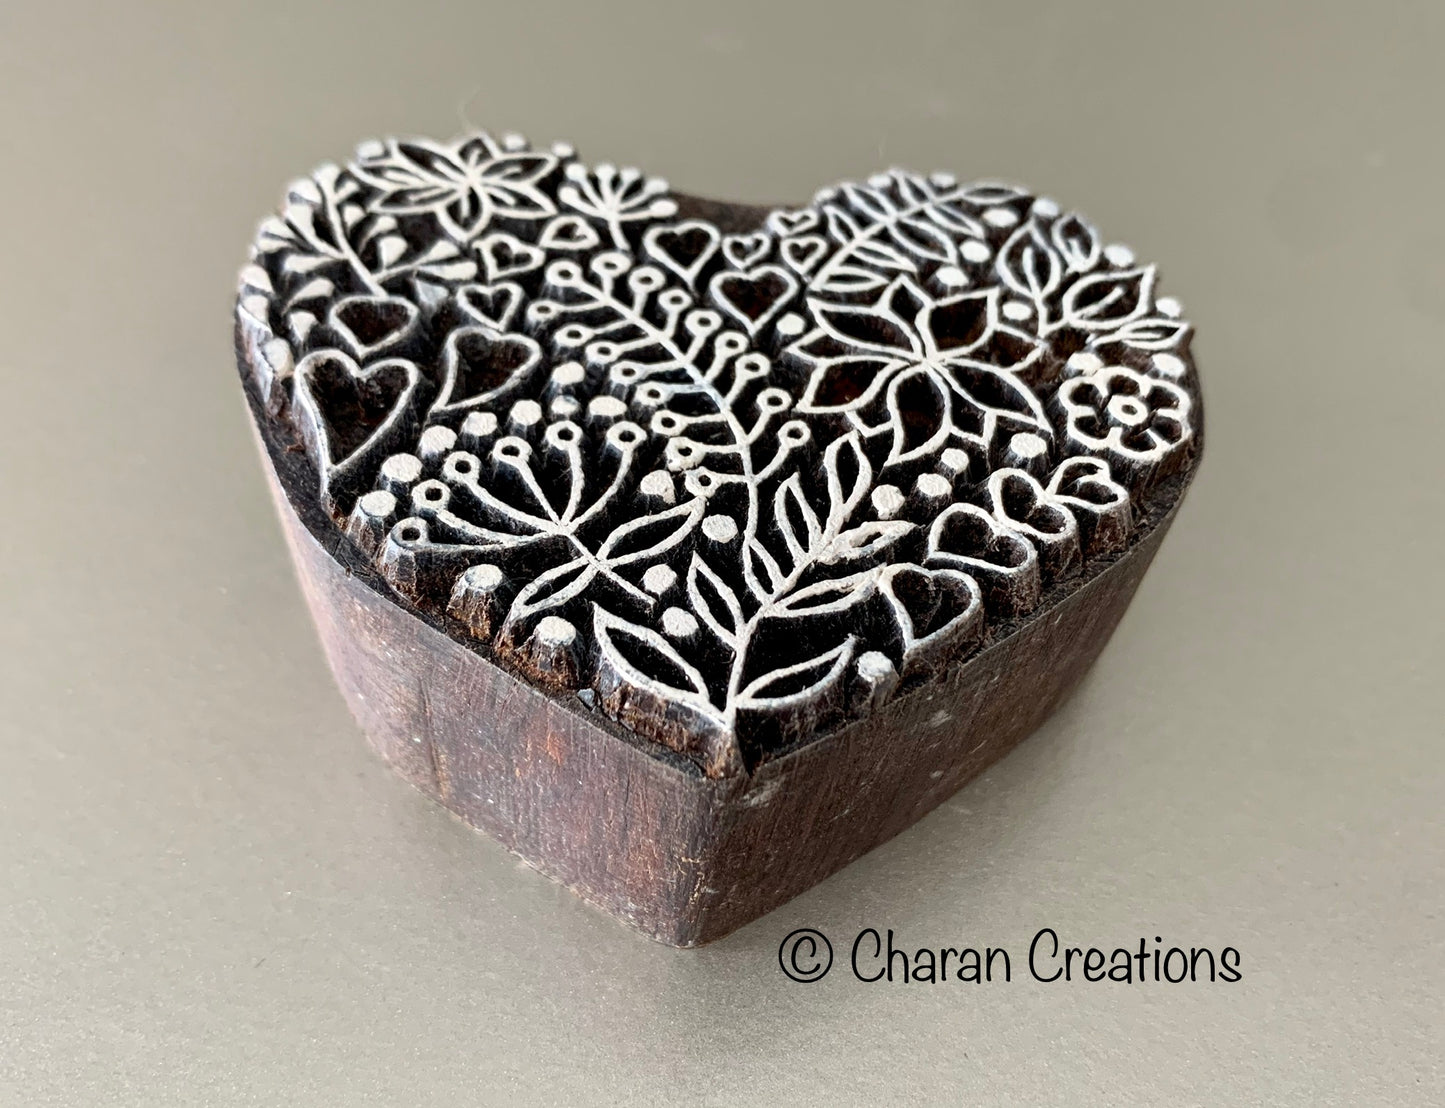 FLORAL HEART STAMP, Pottery Stamp, Wood Block stamp, Fabric Printing Stamp